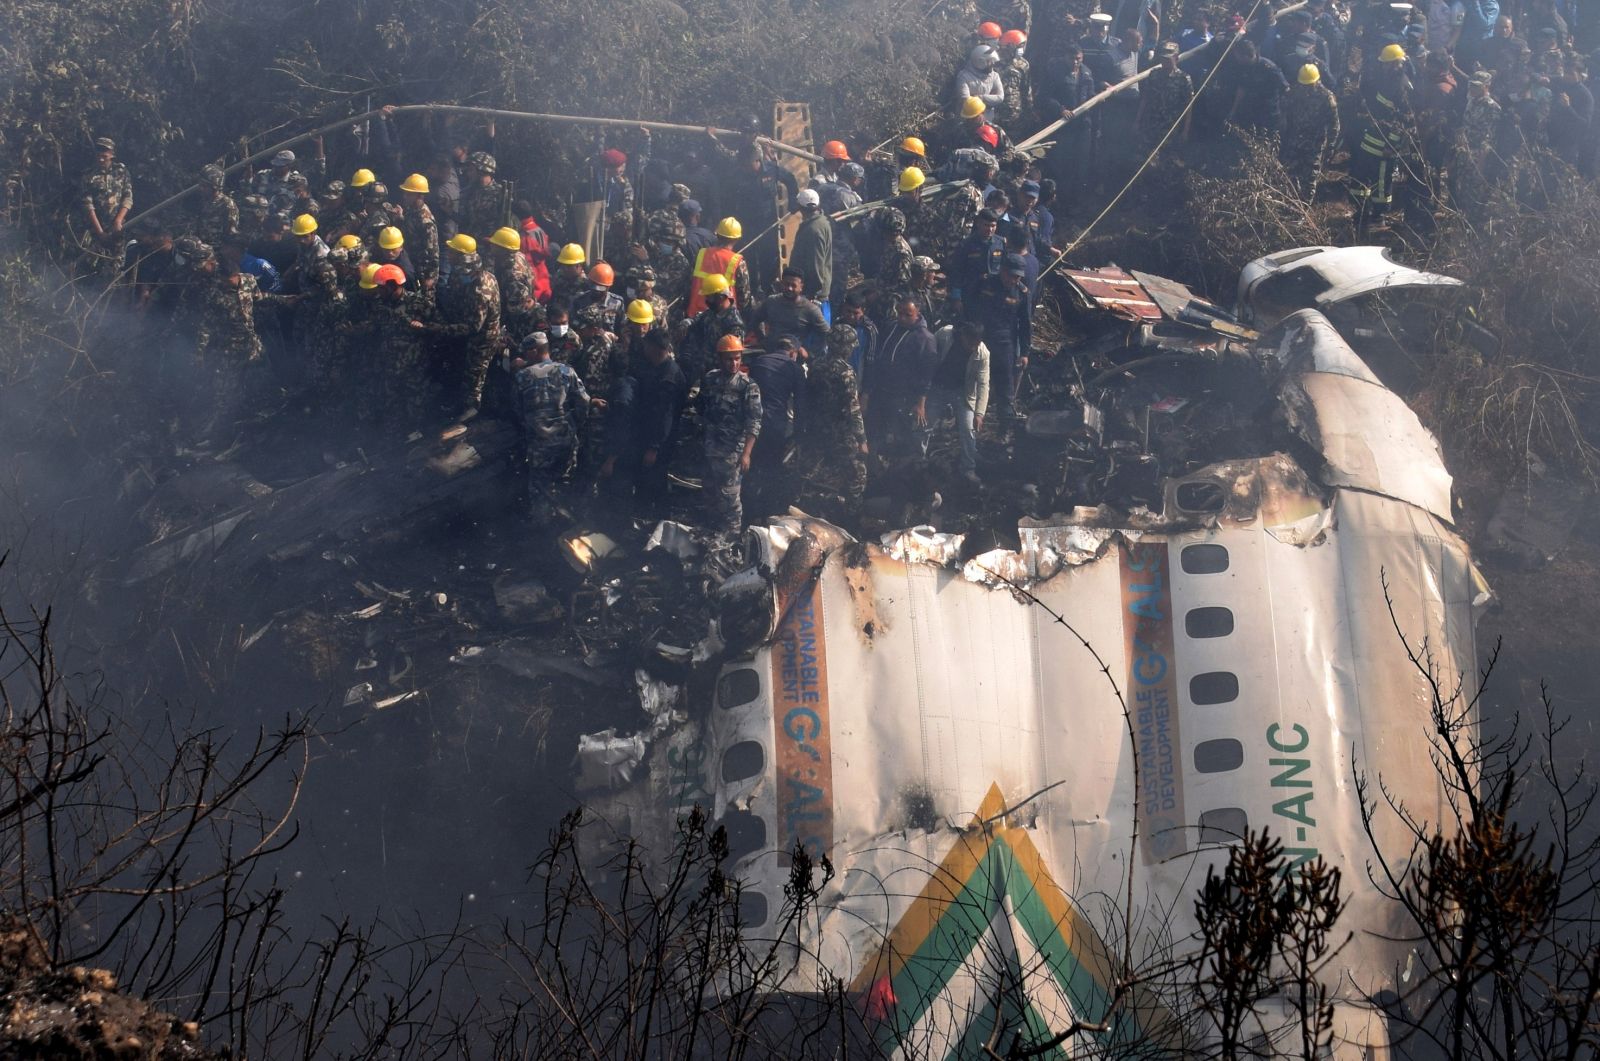 epa10406959 Rescue teams working near the wreckage at the crash site of a Yeti Airlines ATR72 aircraft in Pokhara, central Nepal, 15 January 2023. A Yeti Airlines ATR72 aircraft carrying 72 people on board, 68 passengers and 4 crew members, crashed into a gorge while trying to land at the Pokhara International Airport. According to a statement from the Civil Aviation Authority of Nepal (CAAN), at least 68 people were confirmed dead.  EPA/KRISHNA MANI BARAL